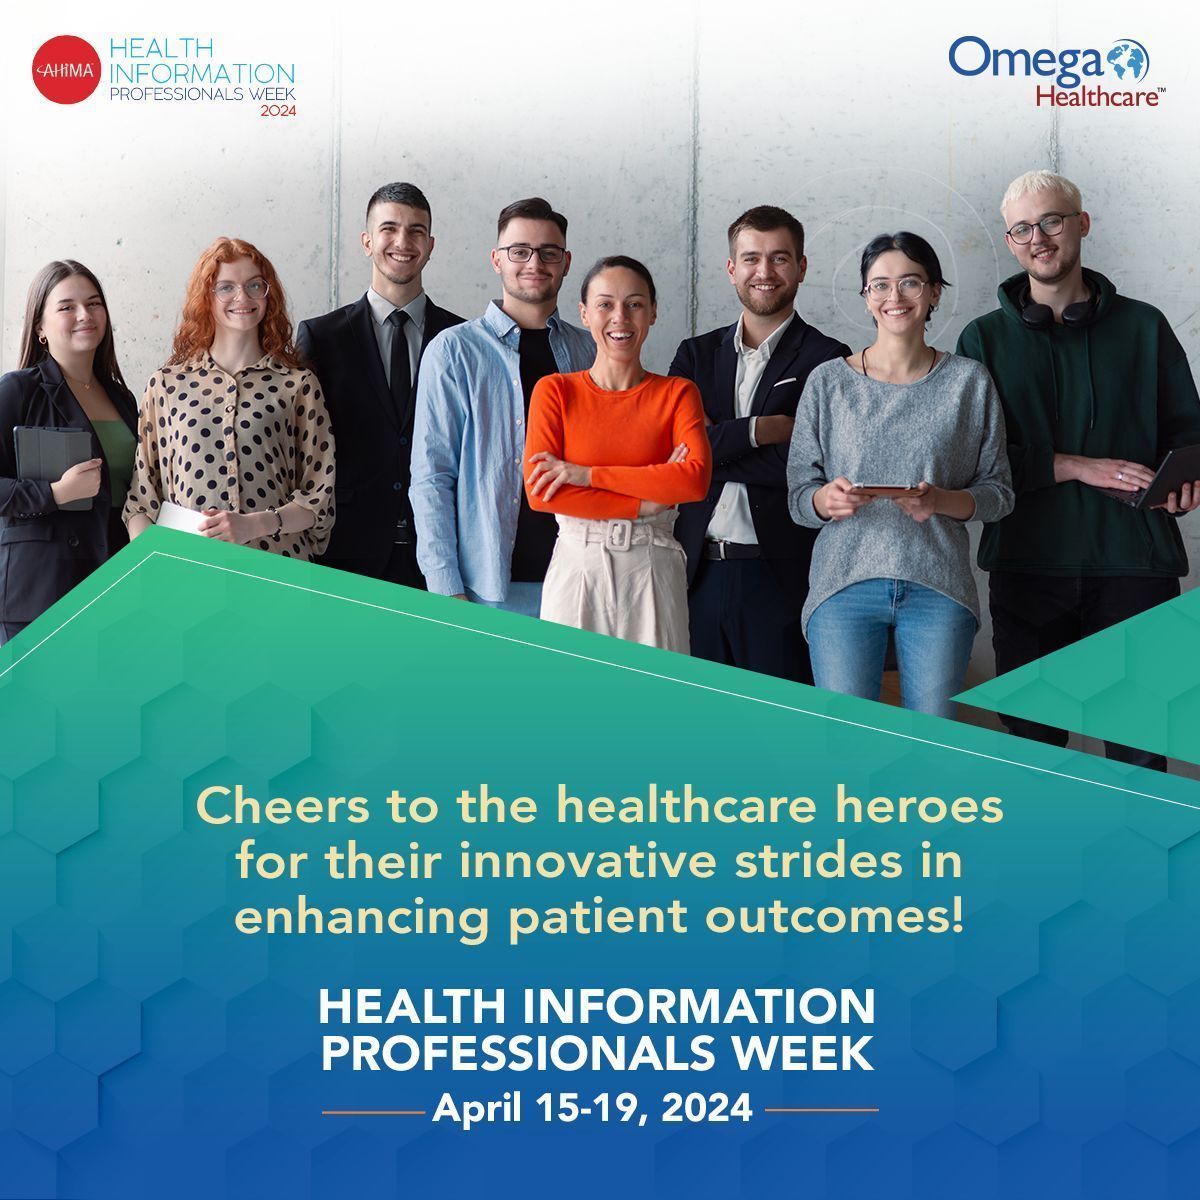 Happy #HIPWEEK24! We’re celebrating all health information professionals for their work in helping to improve patient outcomes and drive healthcare innovation. Thank you for all that you do!

#HealthInformationManagement #AHIMA #HealthInformation